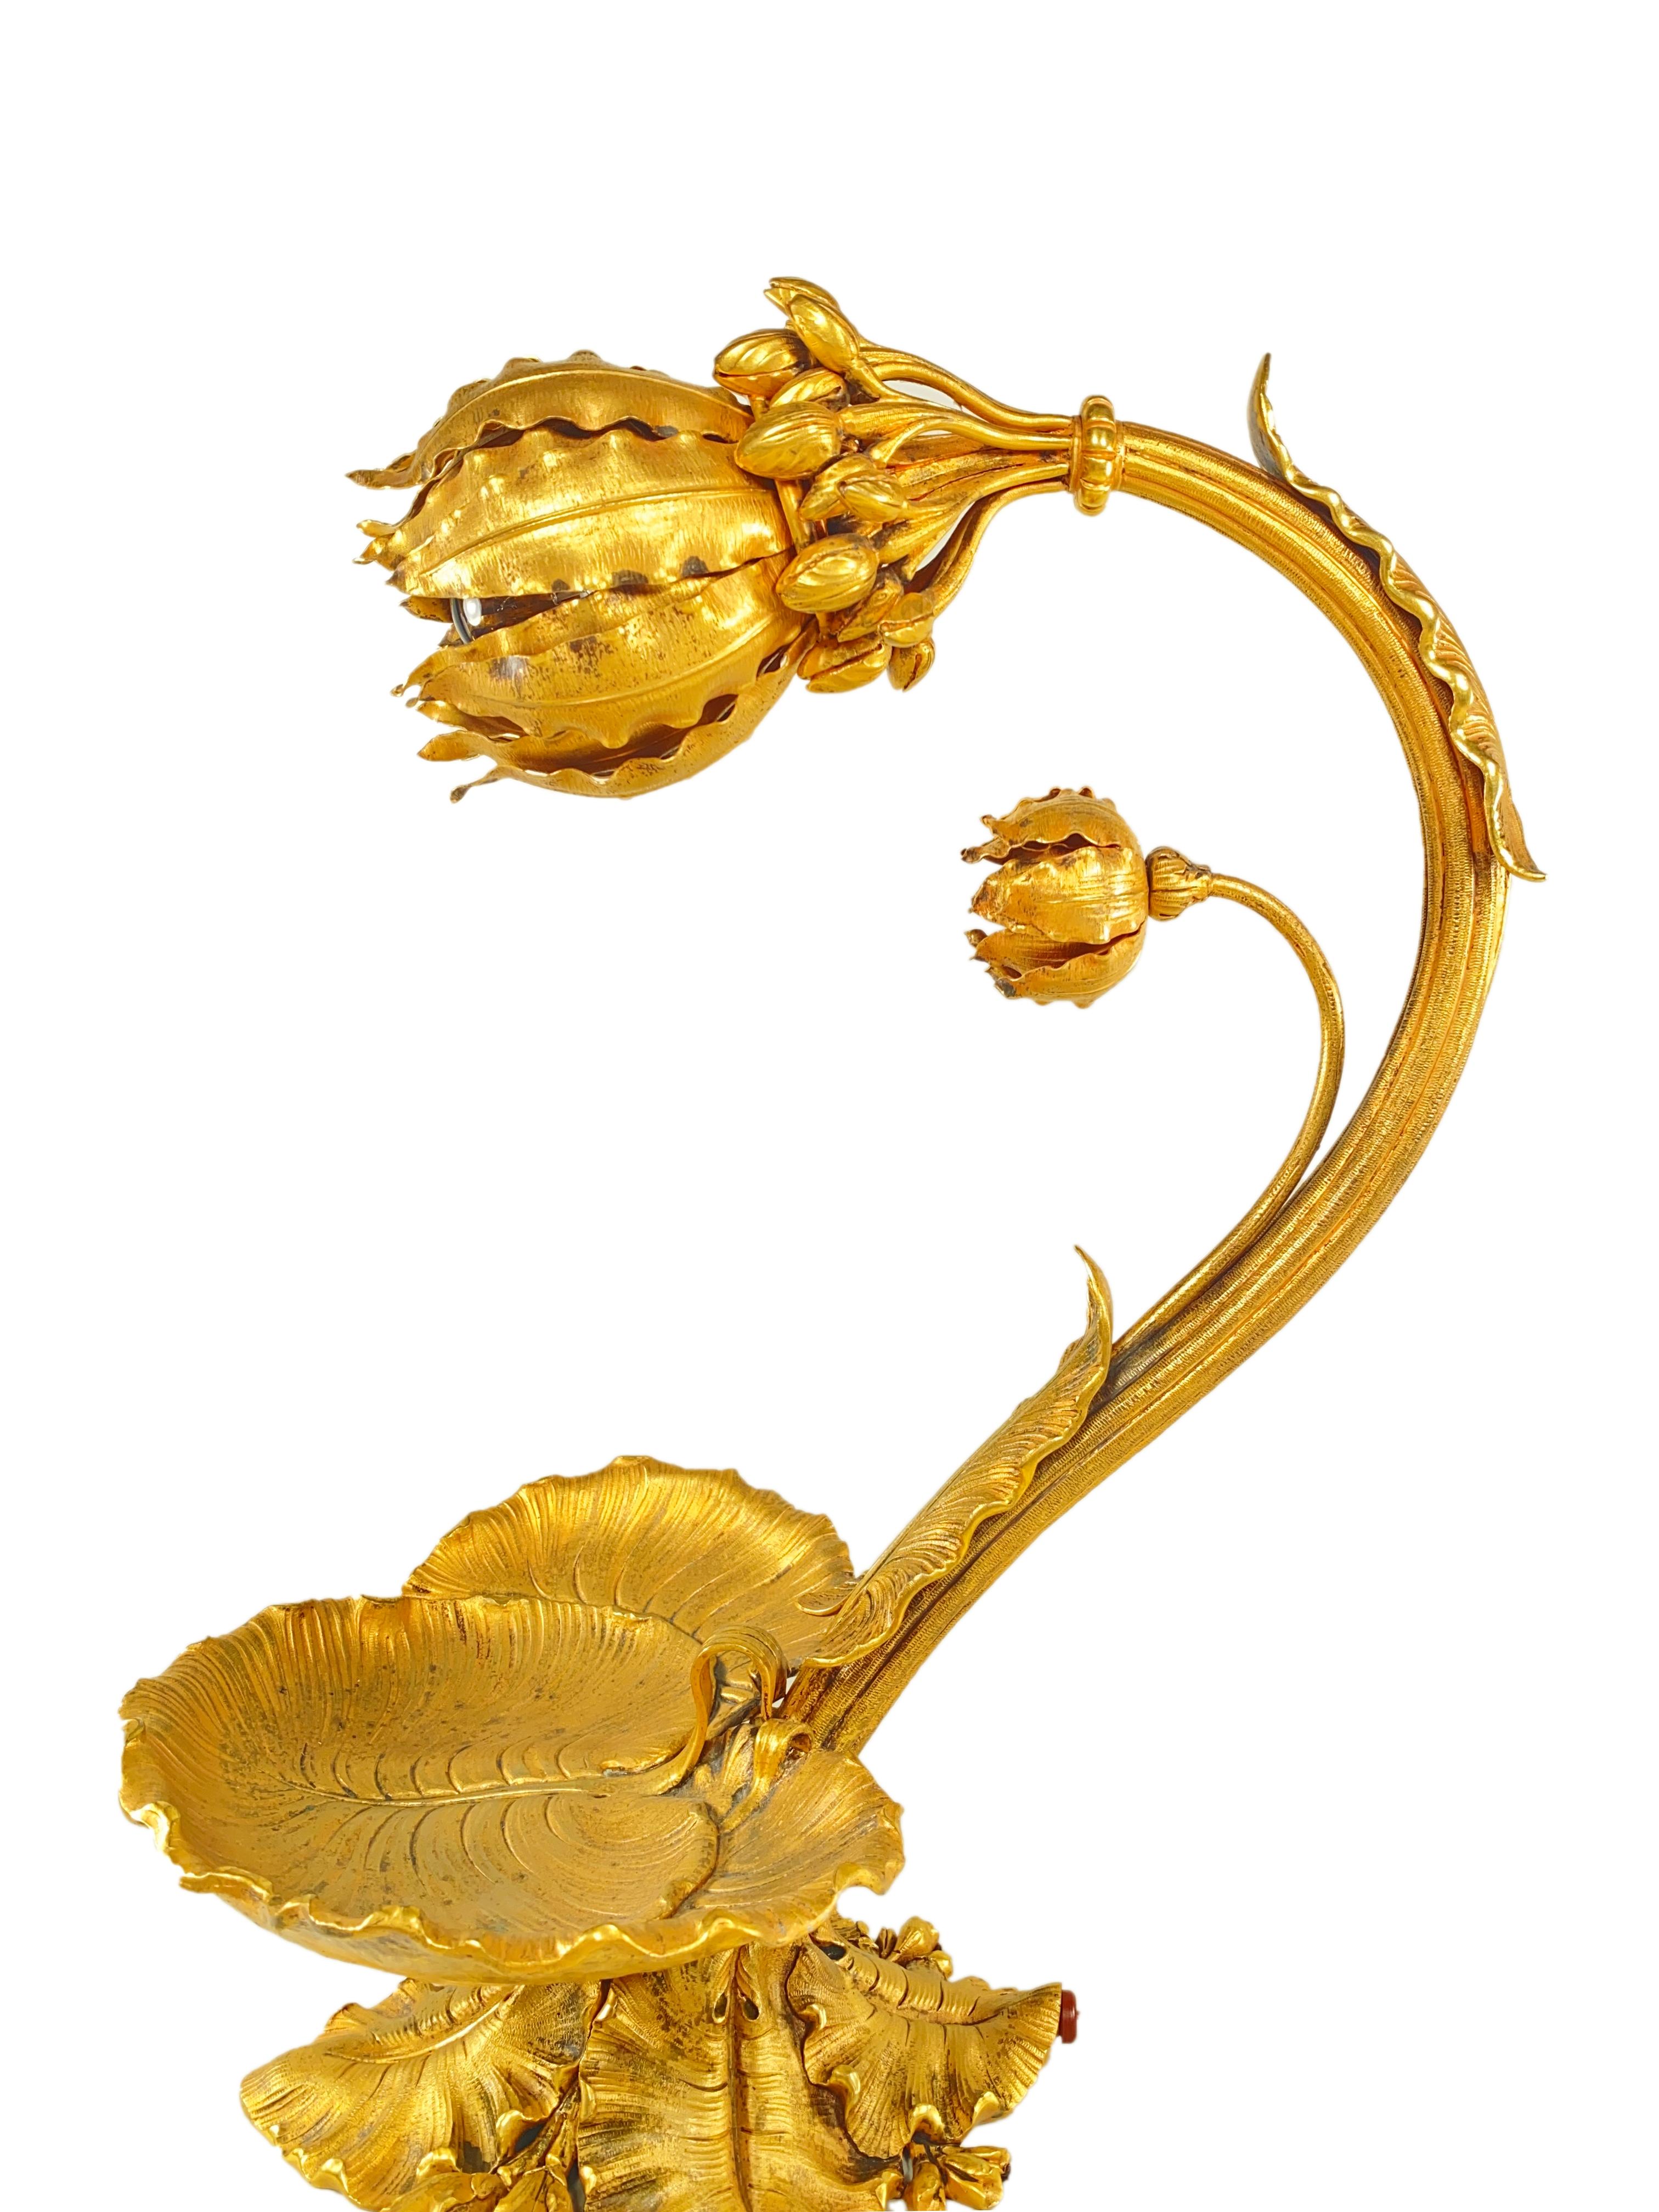 A French Art Nouveau early 20th century gilt bronze desk lamp decorated as a budding flower accentuated with lily pad decoration as a tray leading with leafage and floral buds from the arch leading into a budding flora shaped gilt bronze shade. The